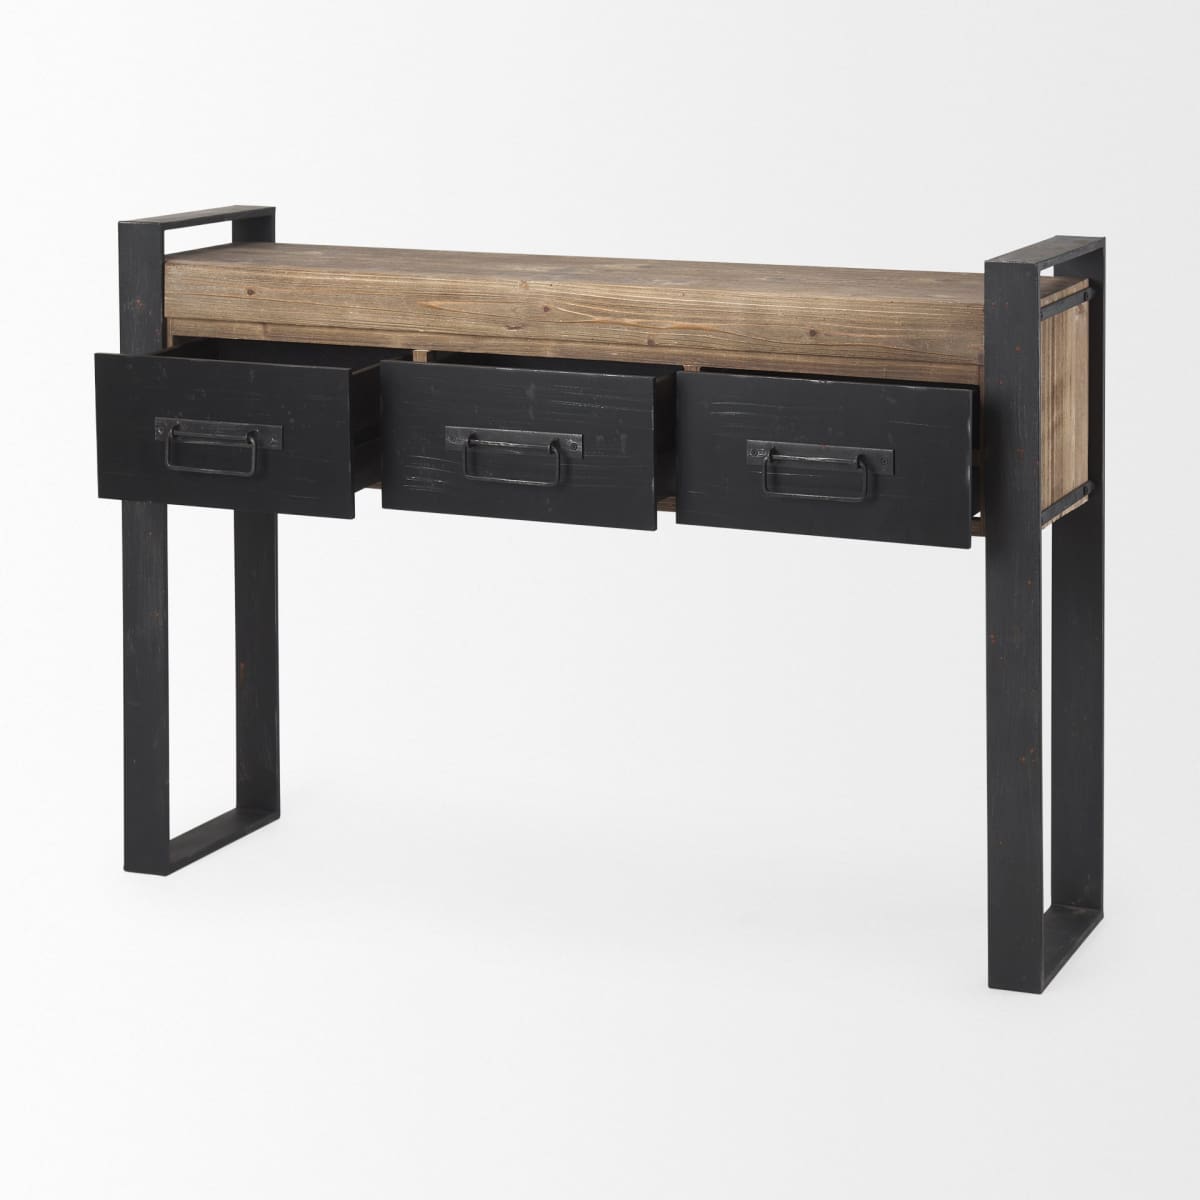 Carga Console Table Brown Wood | Black Metal - console-tables